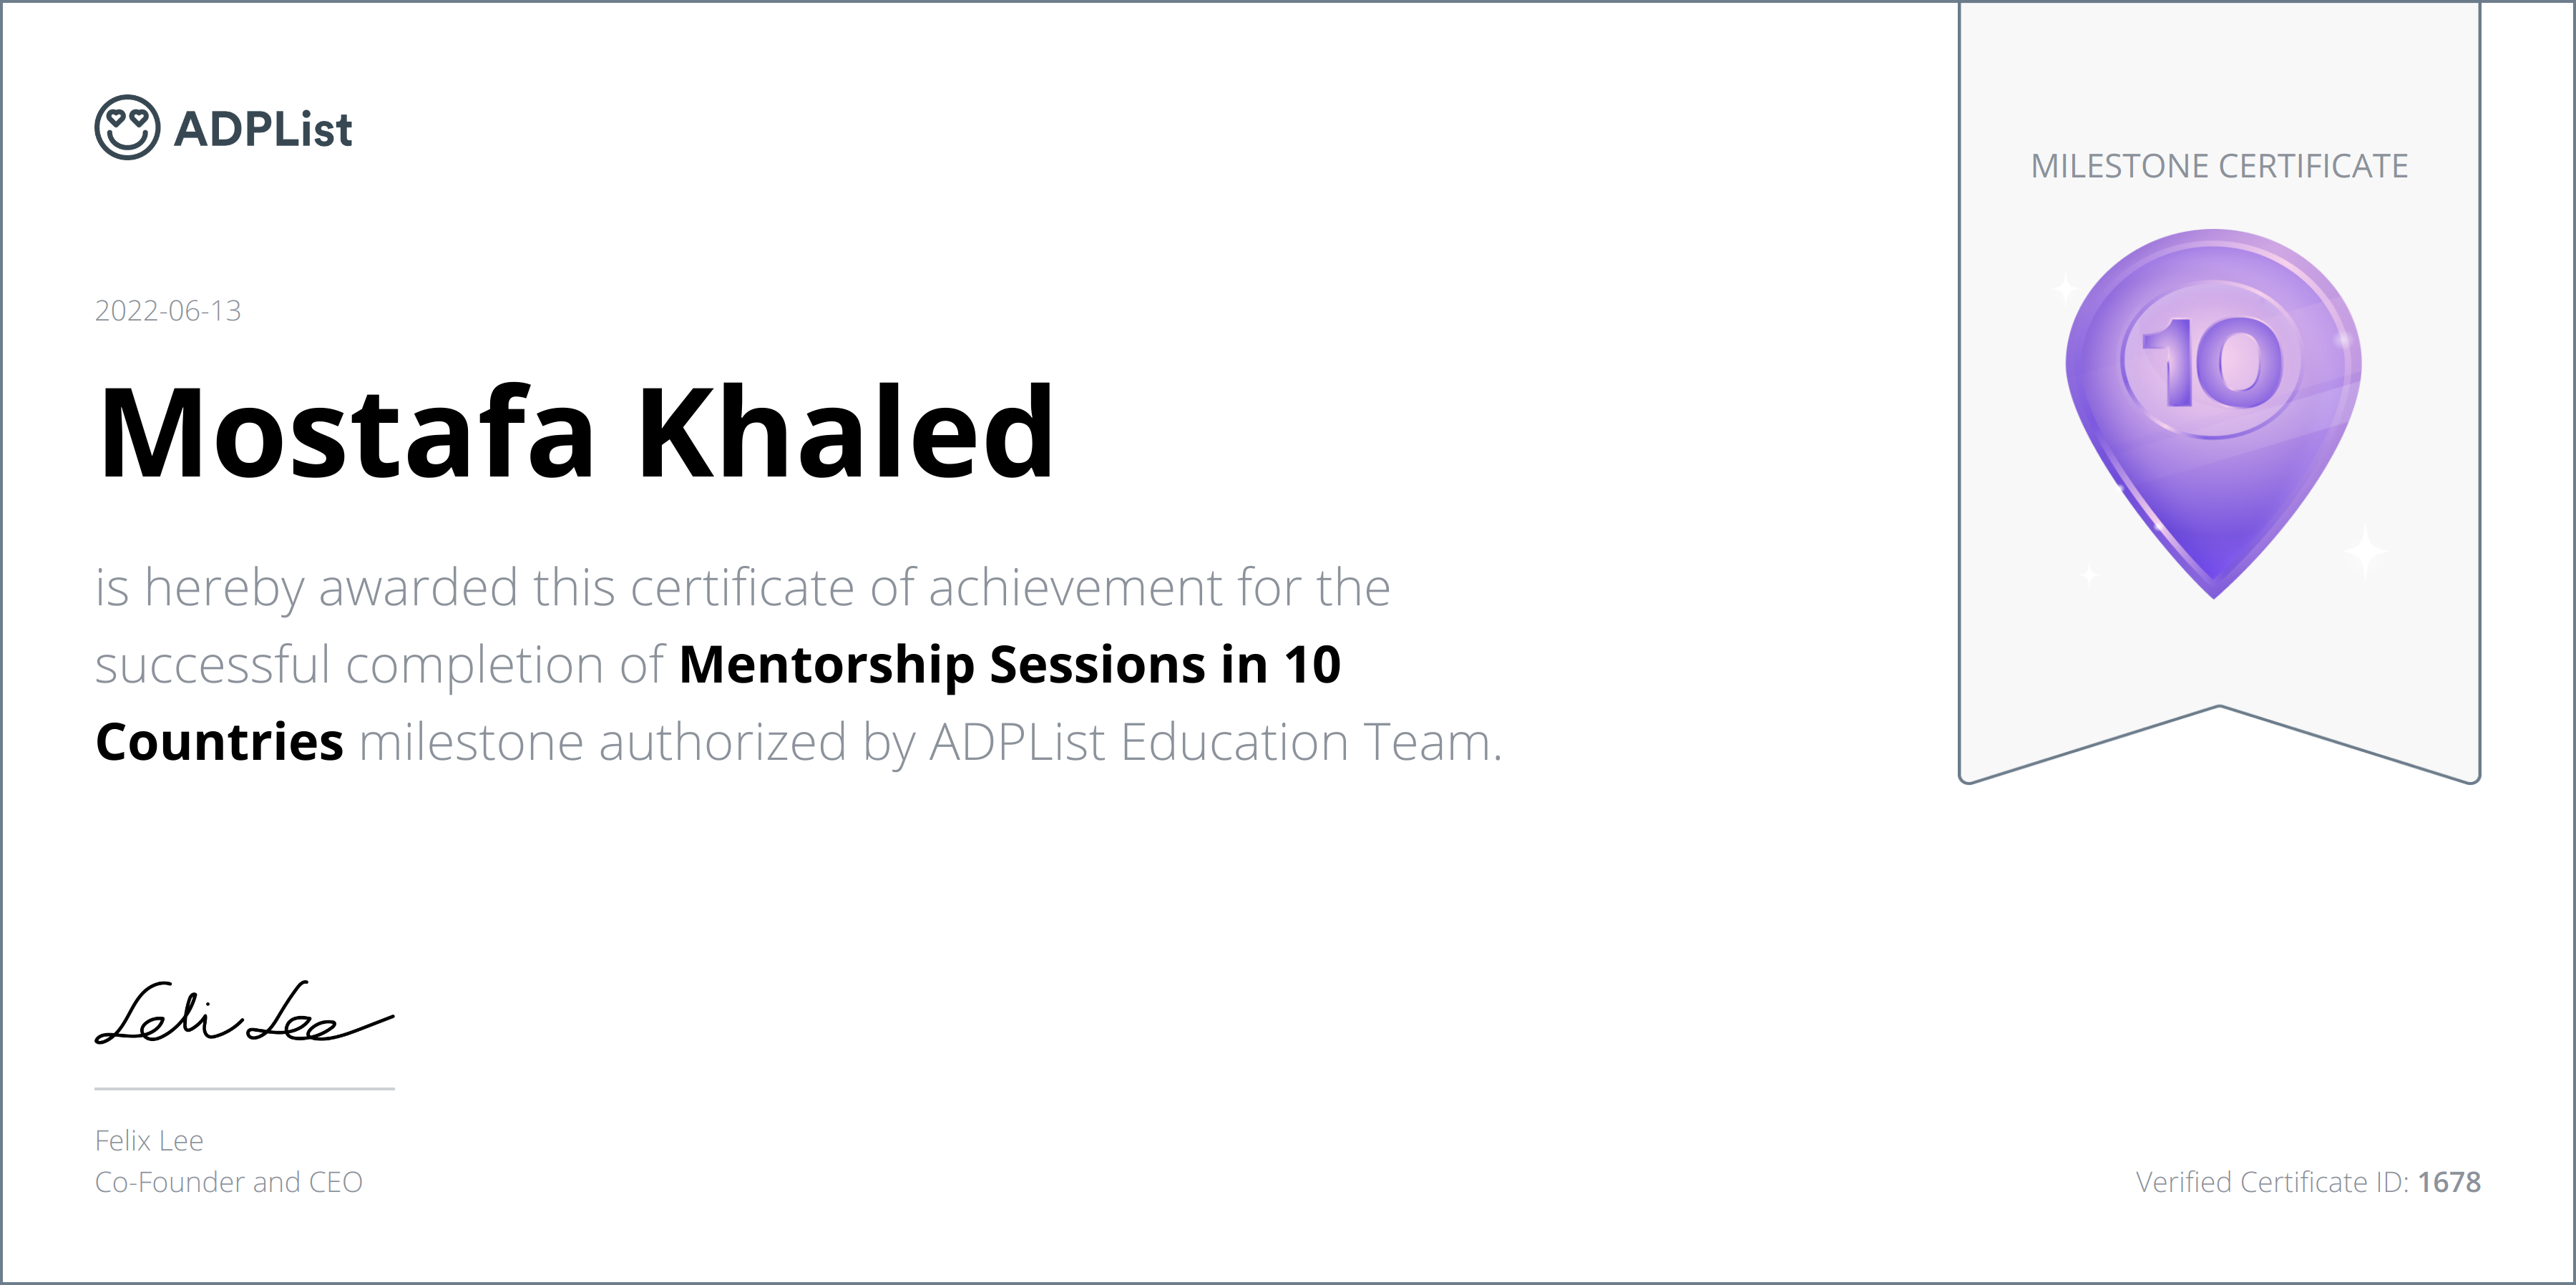 Product Design Mentor completed mentorship sessions across 10 countries on adplist